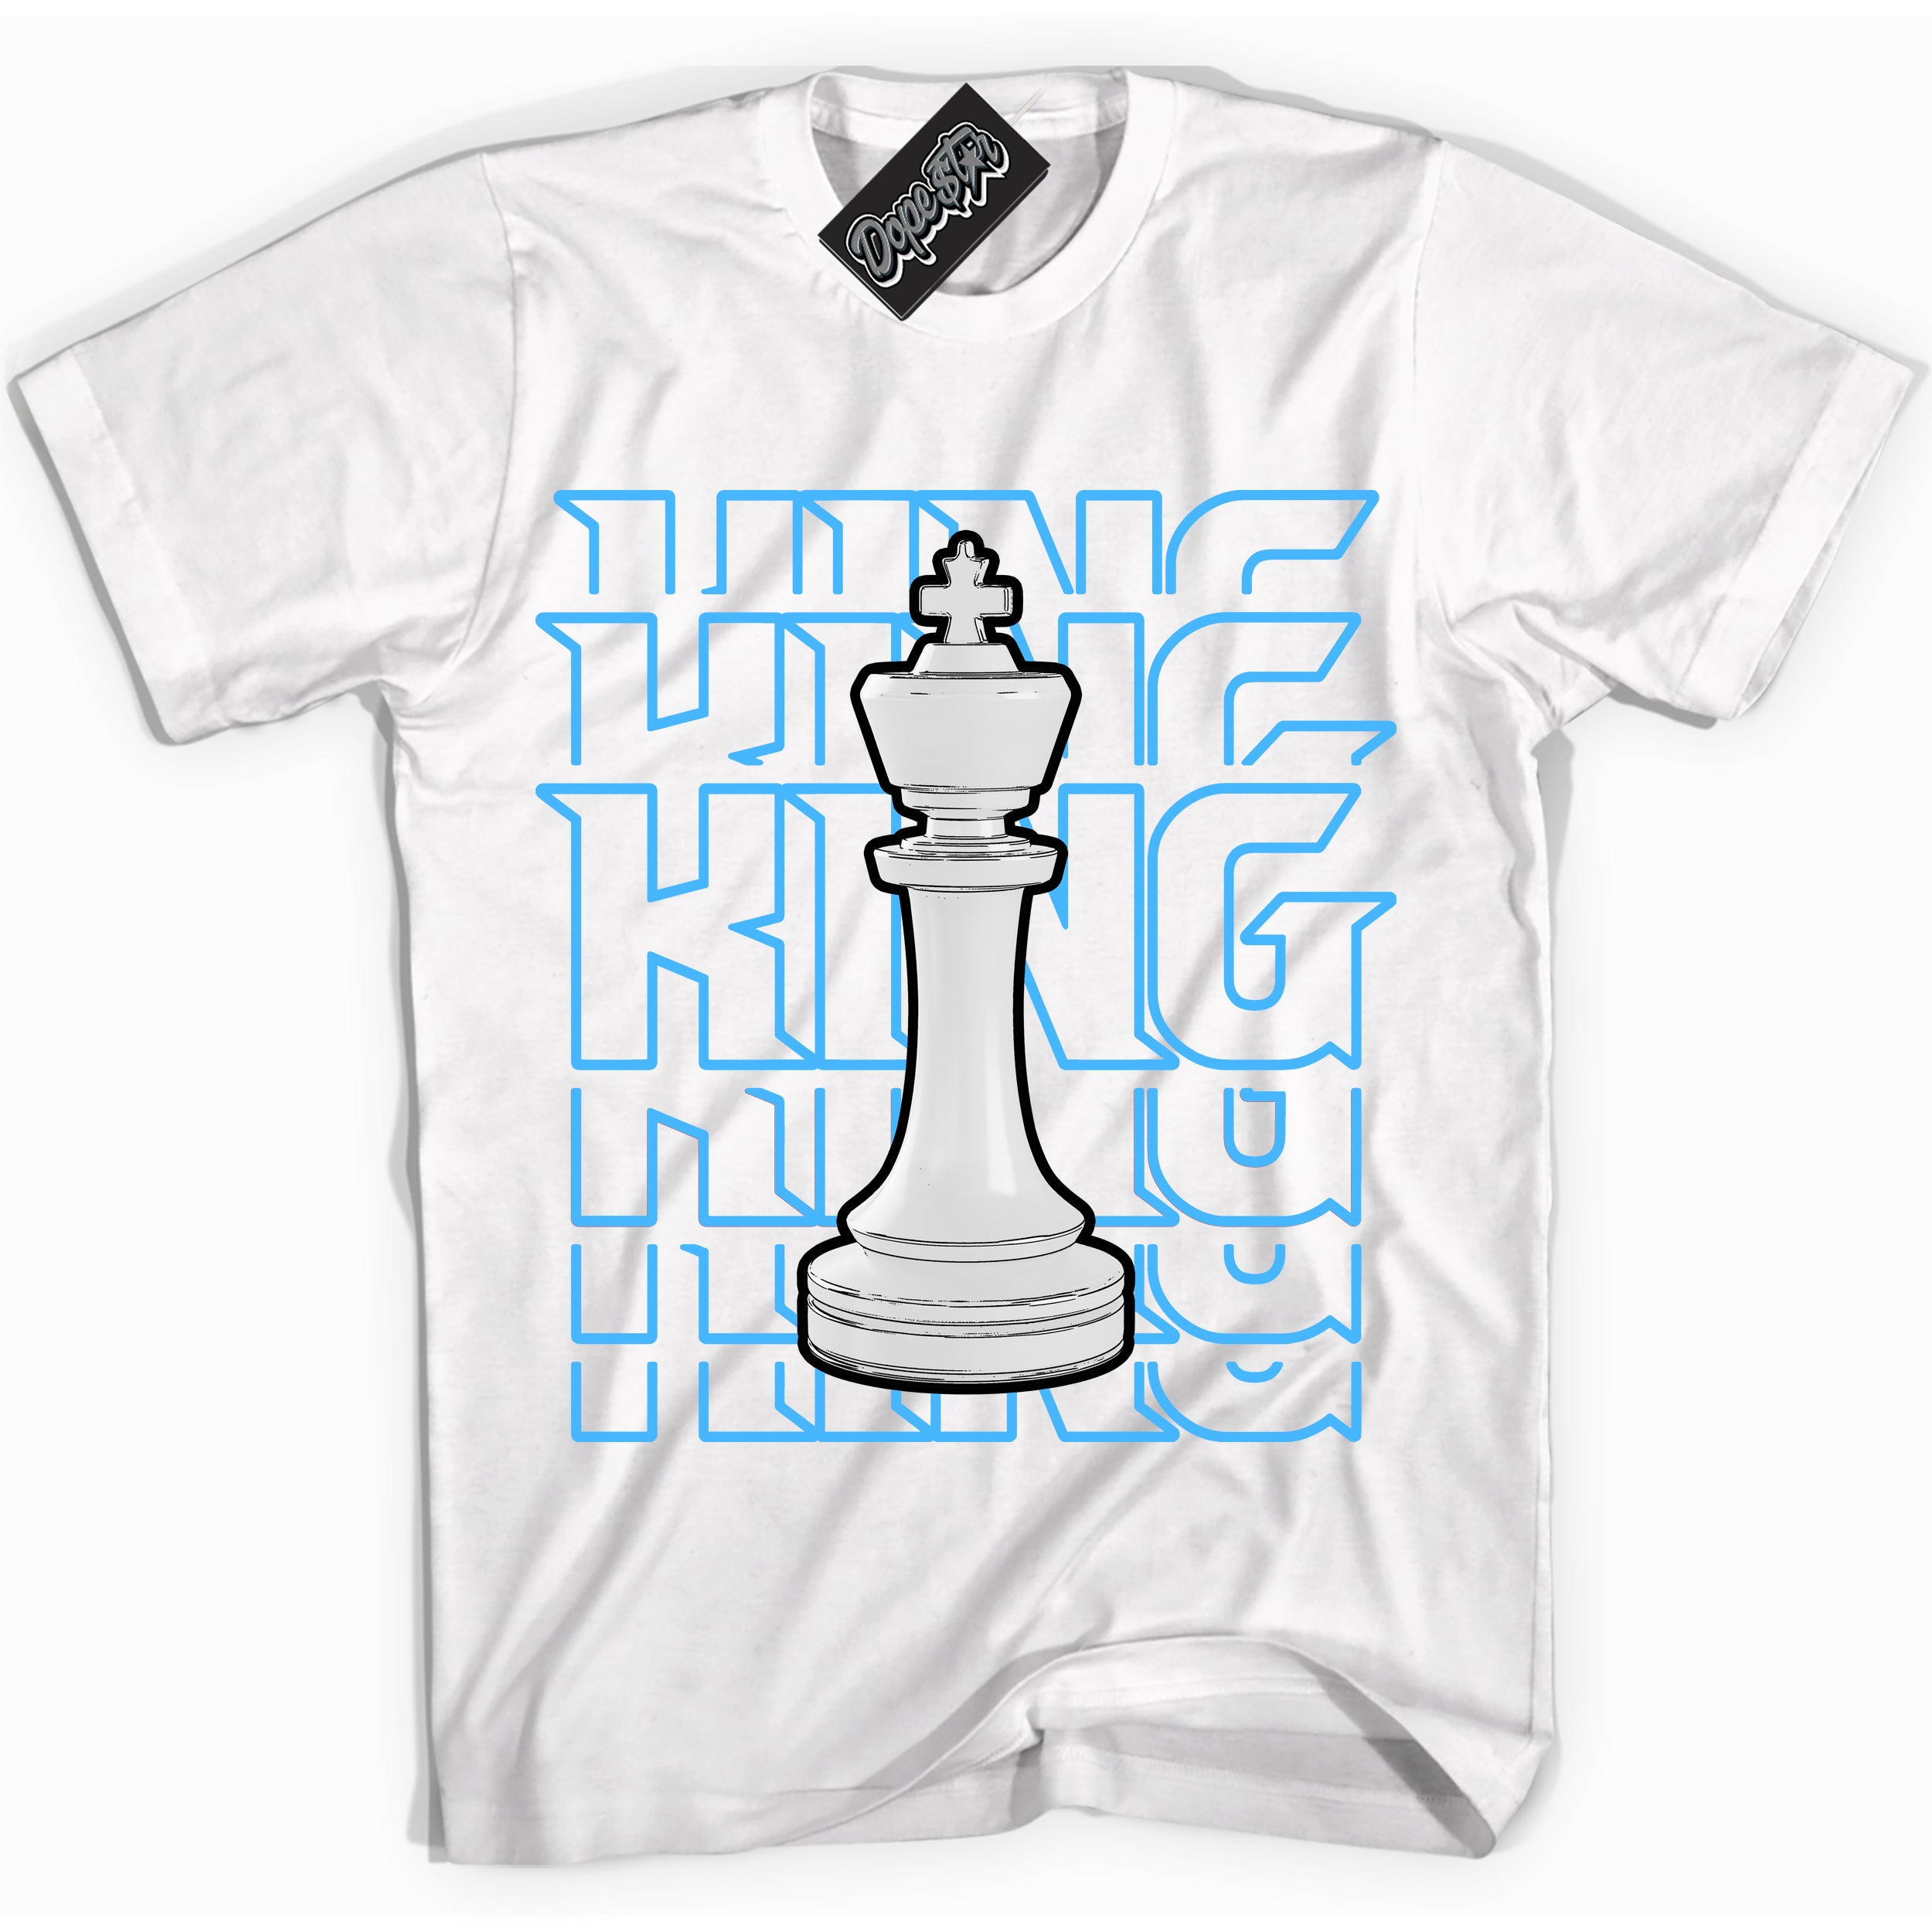 Cool White graphic tee with “ King Chess ” design, that perfectly matches Powder Blue 9s sneakers 